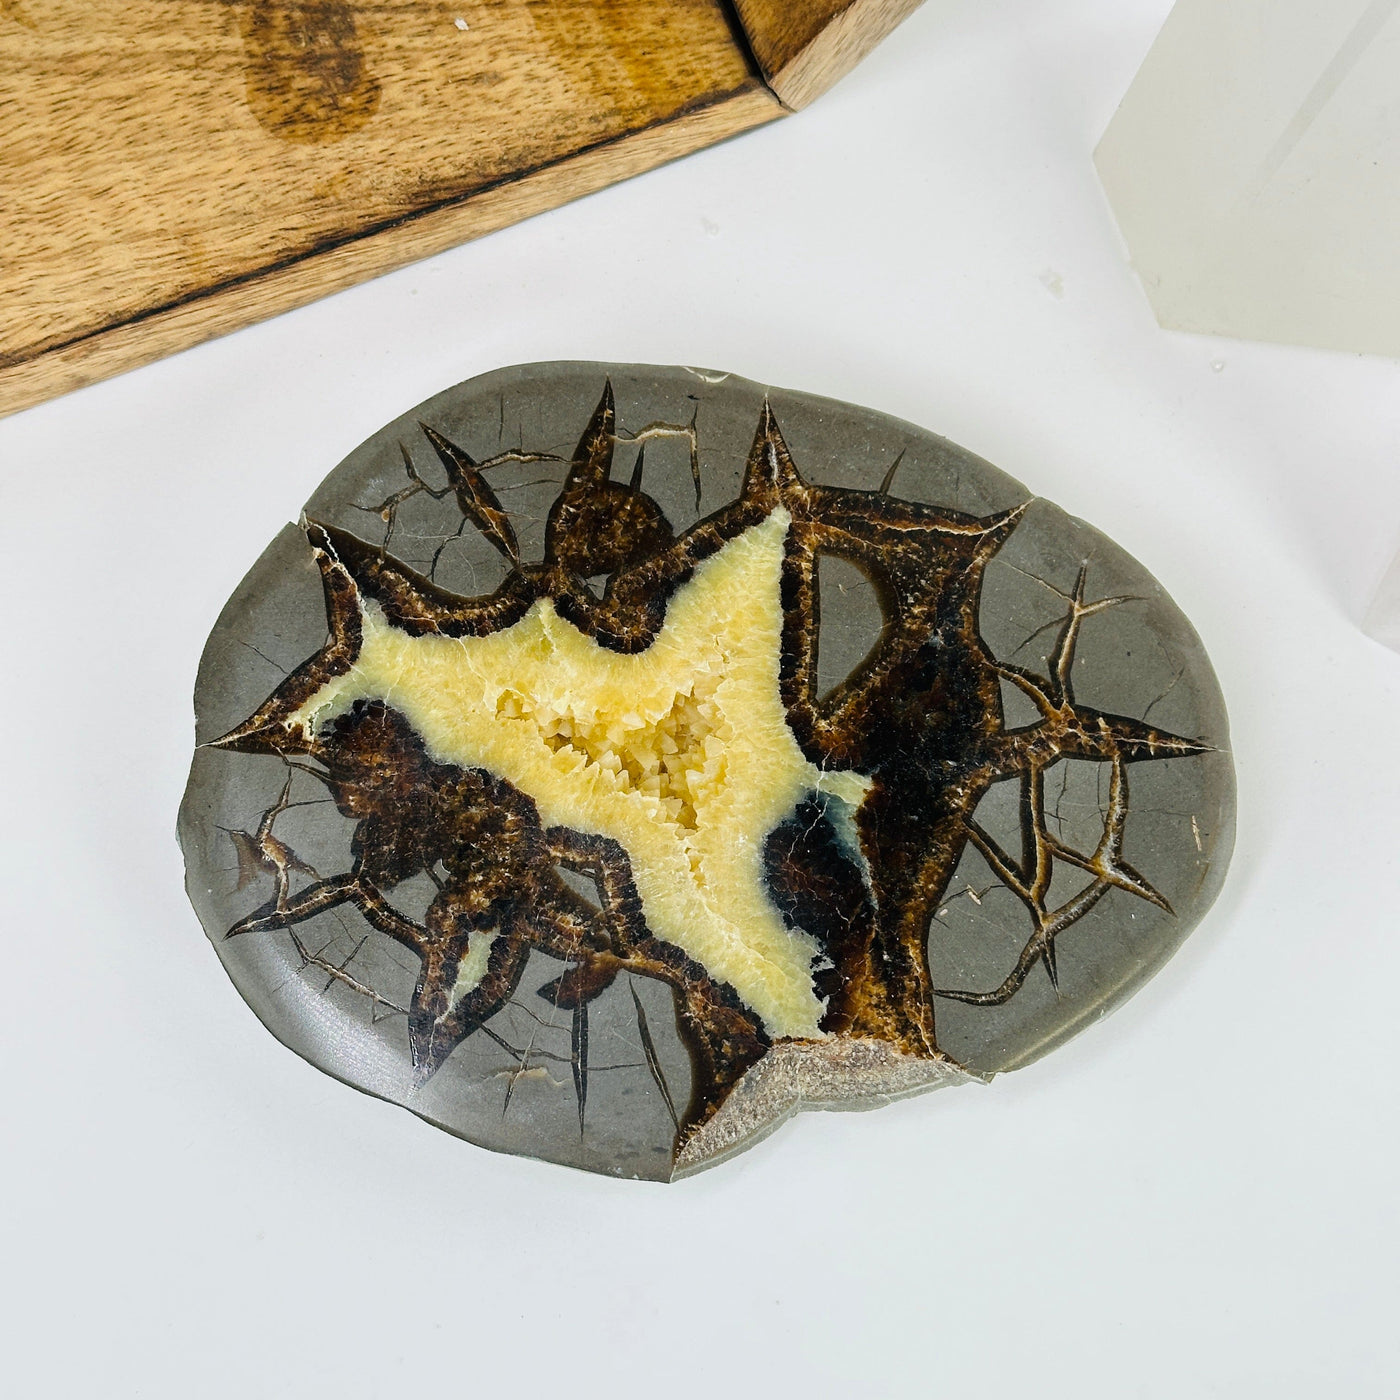 septarian platter with decorations in the background